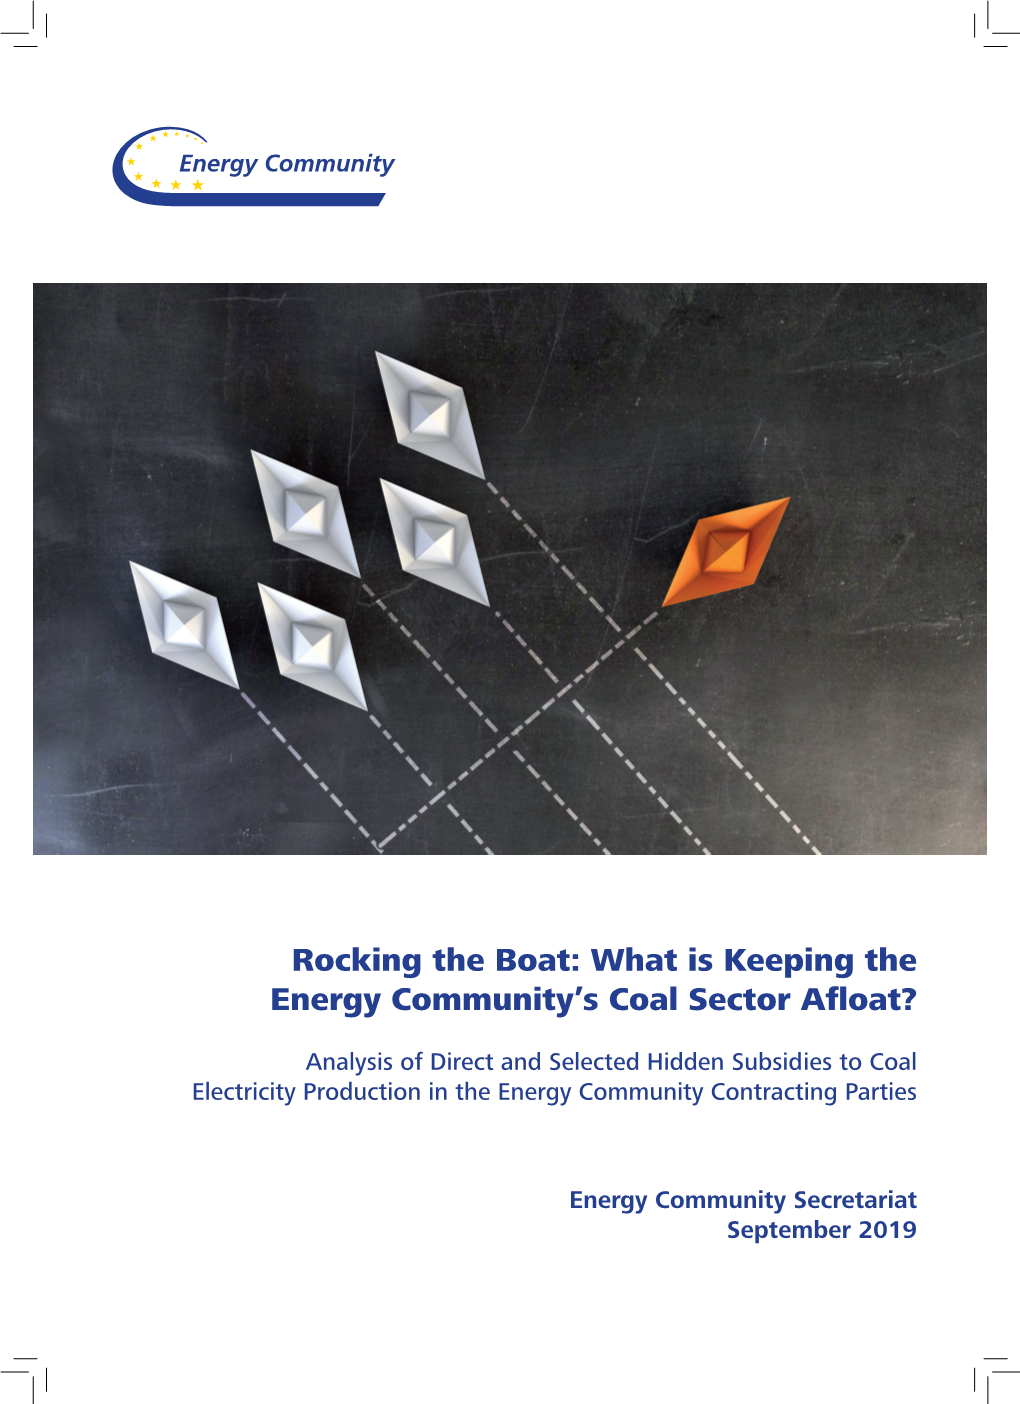 Rocking the Boat: What Is Keeping the Energy Community's Coal Sector Afloat?